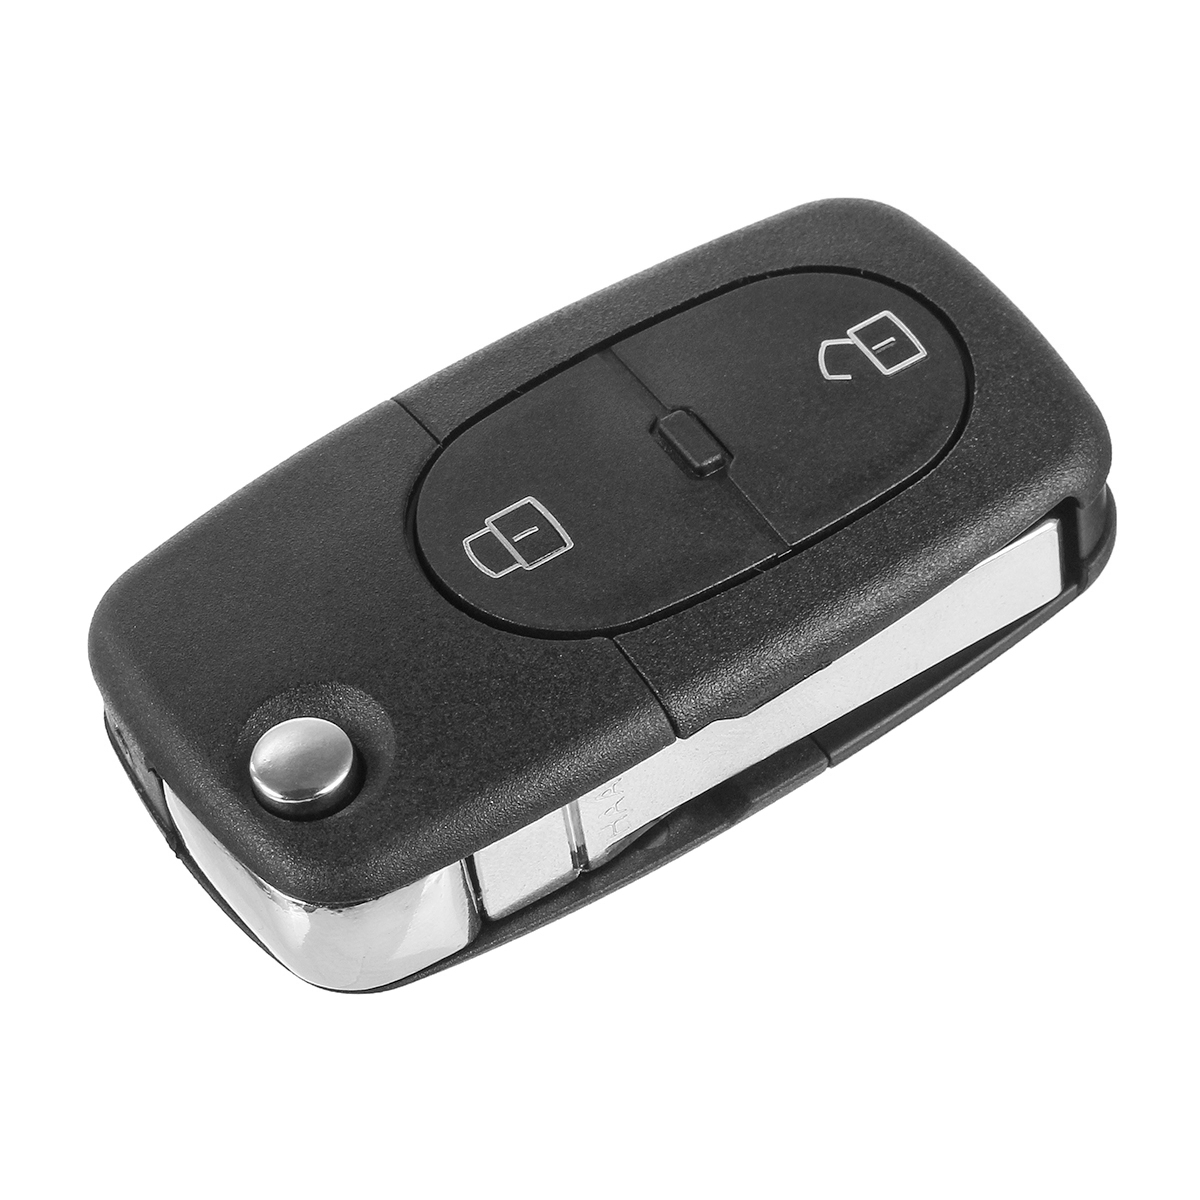 Other Parts & Accessories 2 Button Remote Key Fob Case Shell + Battery For Audi S1 A3 S3 A6 A8